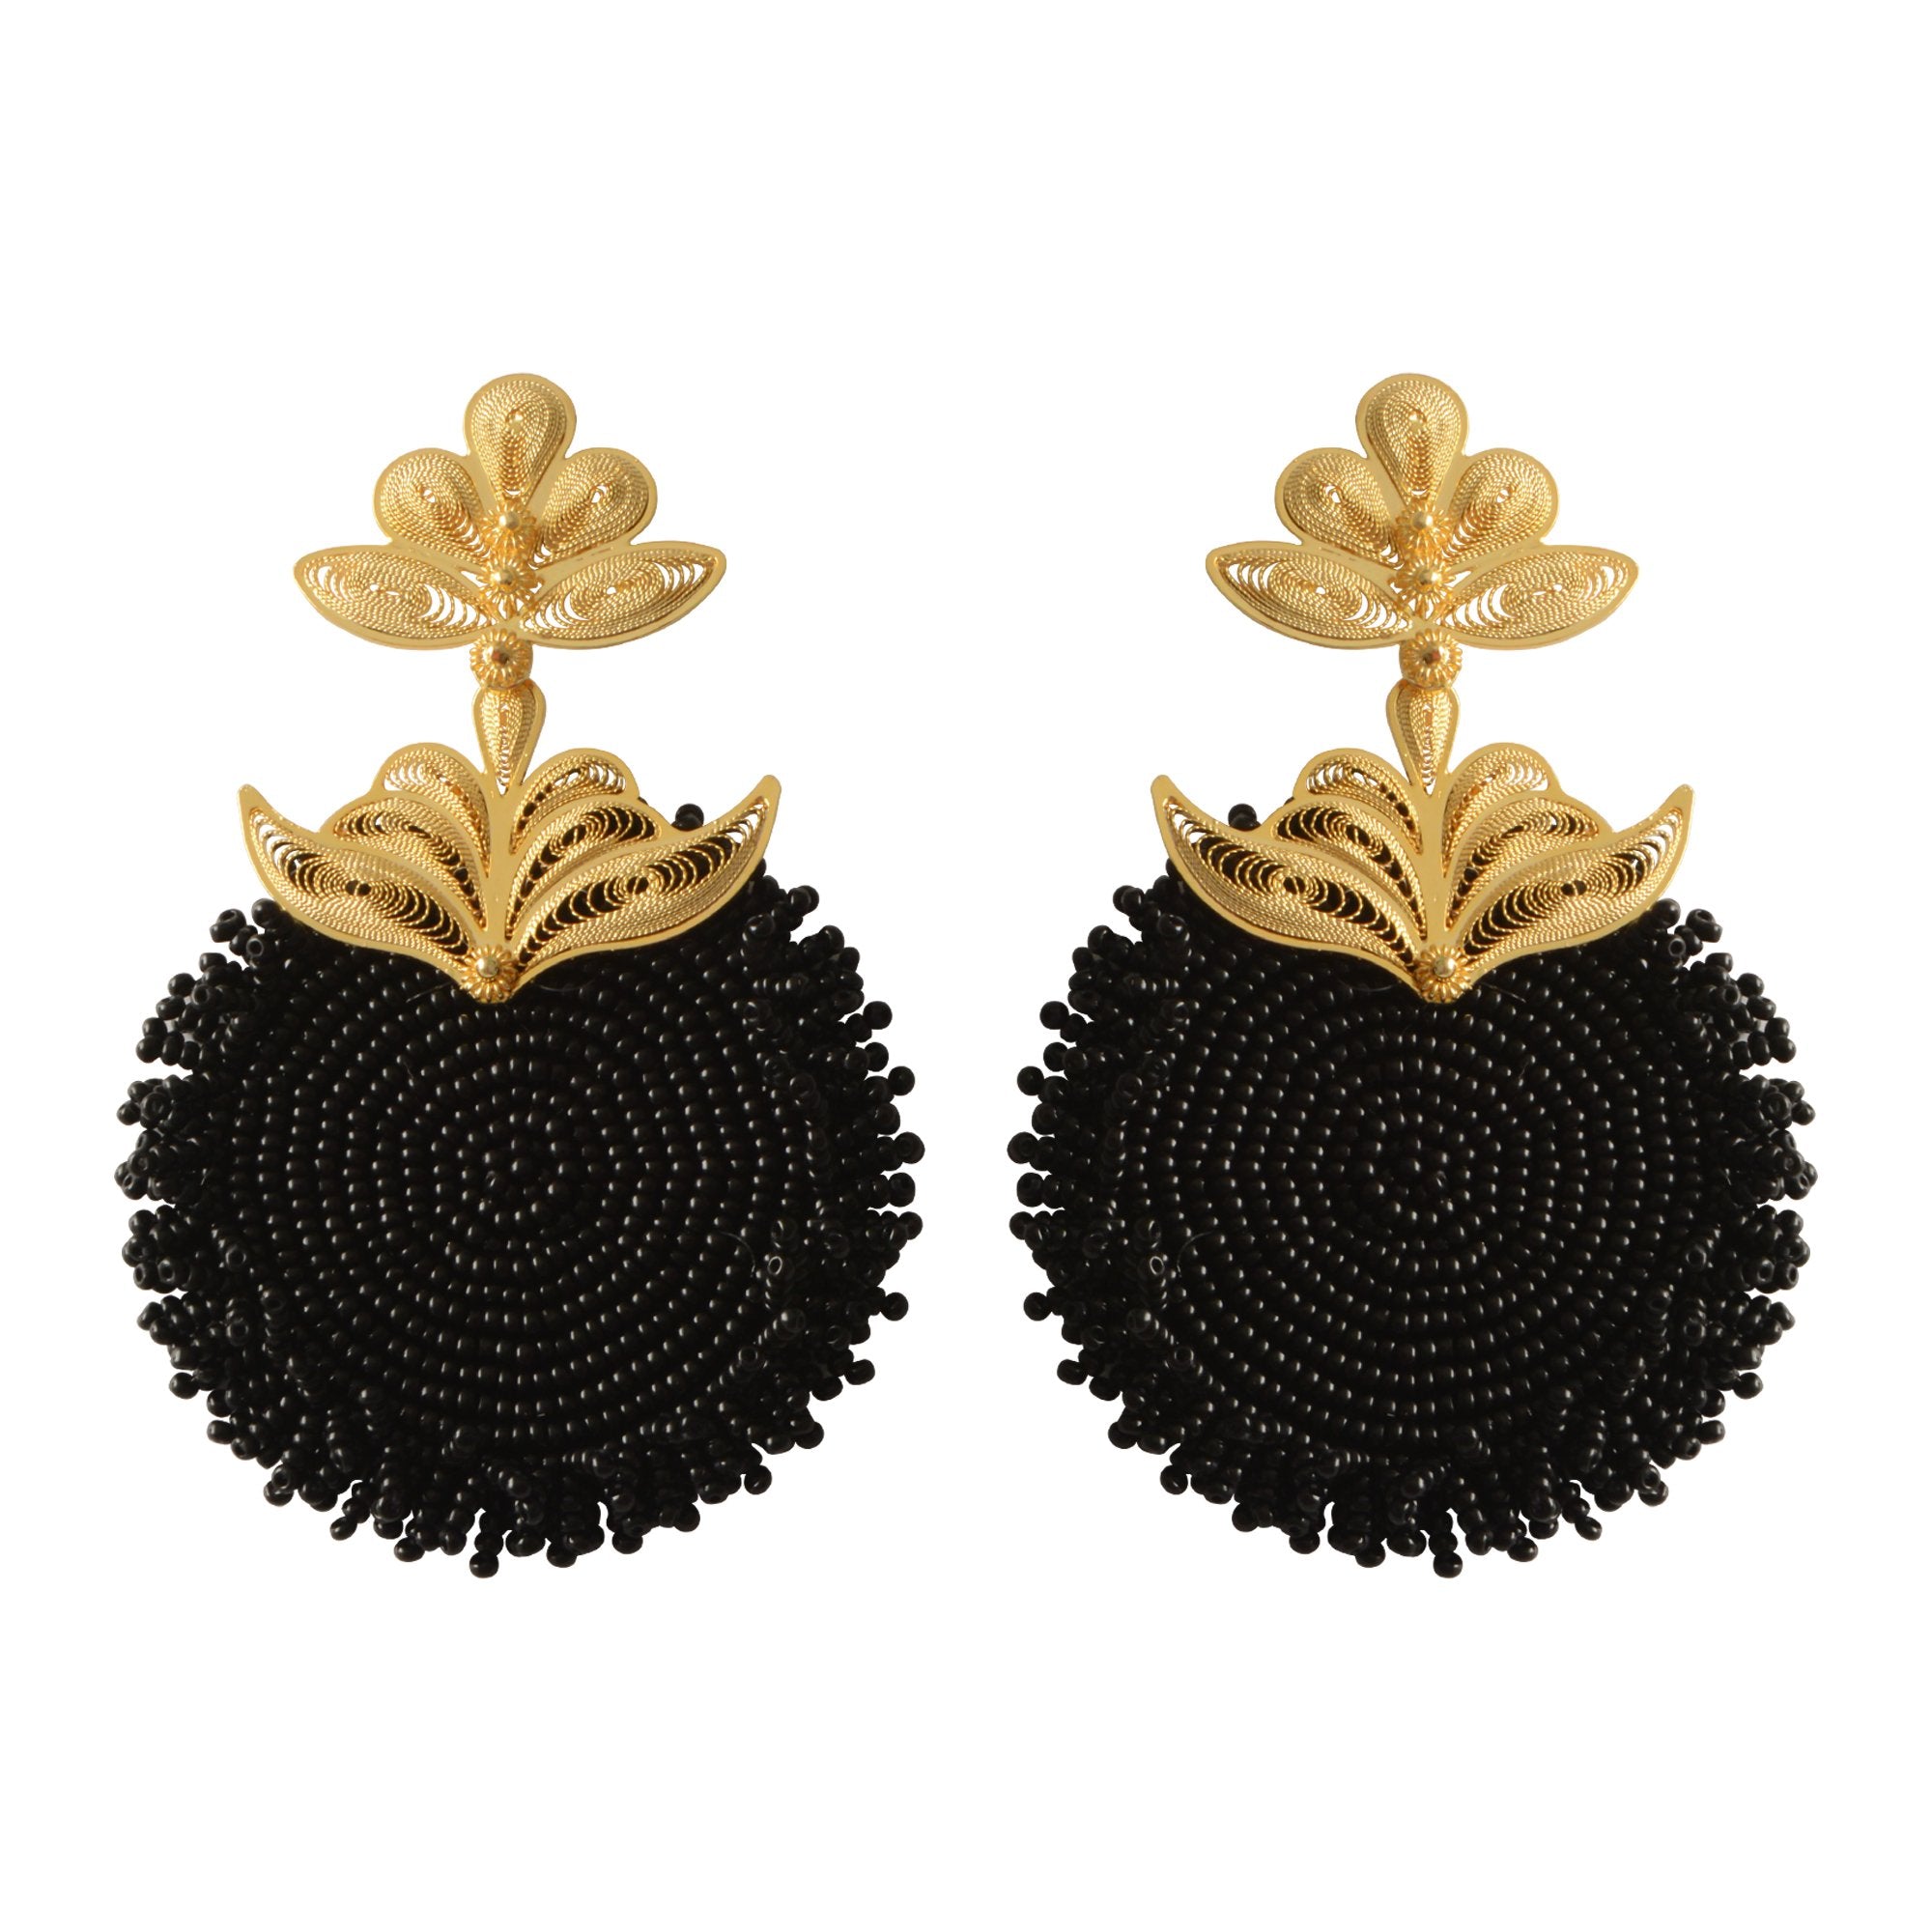 'Chequia' gold-plated earrings - My Paloma